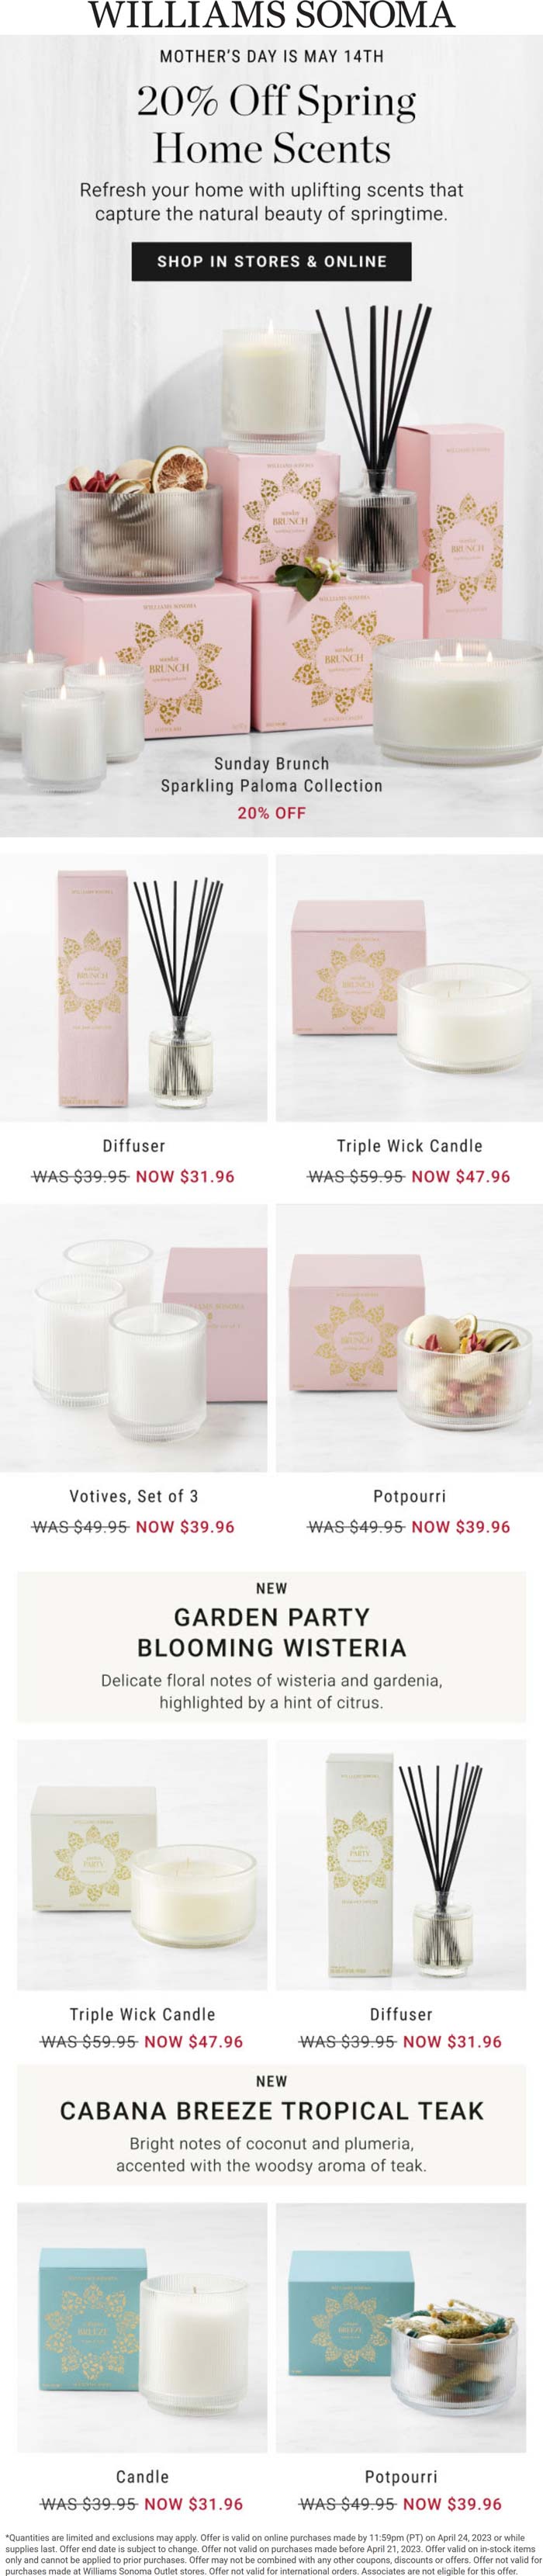 Williams Sonoma stores Coupon  20% off novelty scents collections at Williams Sonoma, ditto online #williamssonoma 